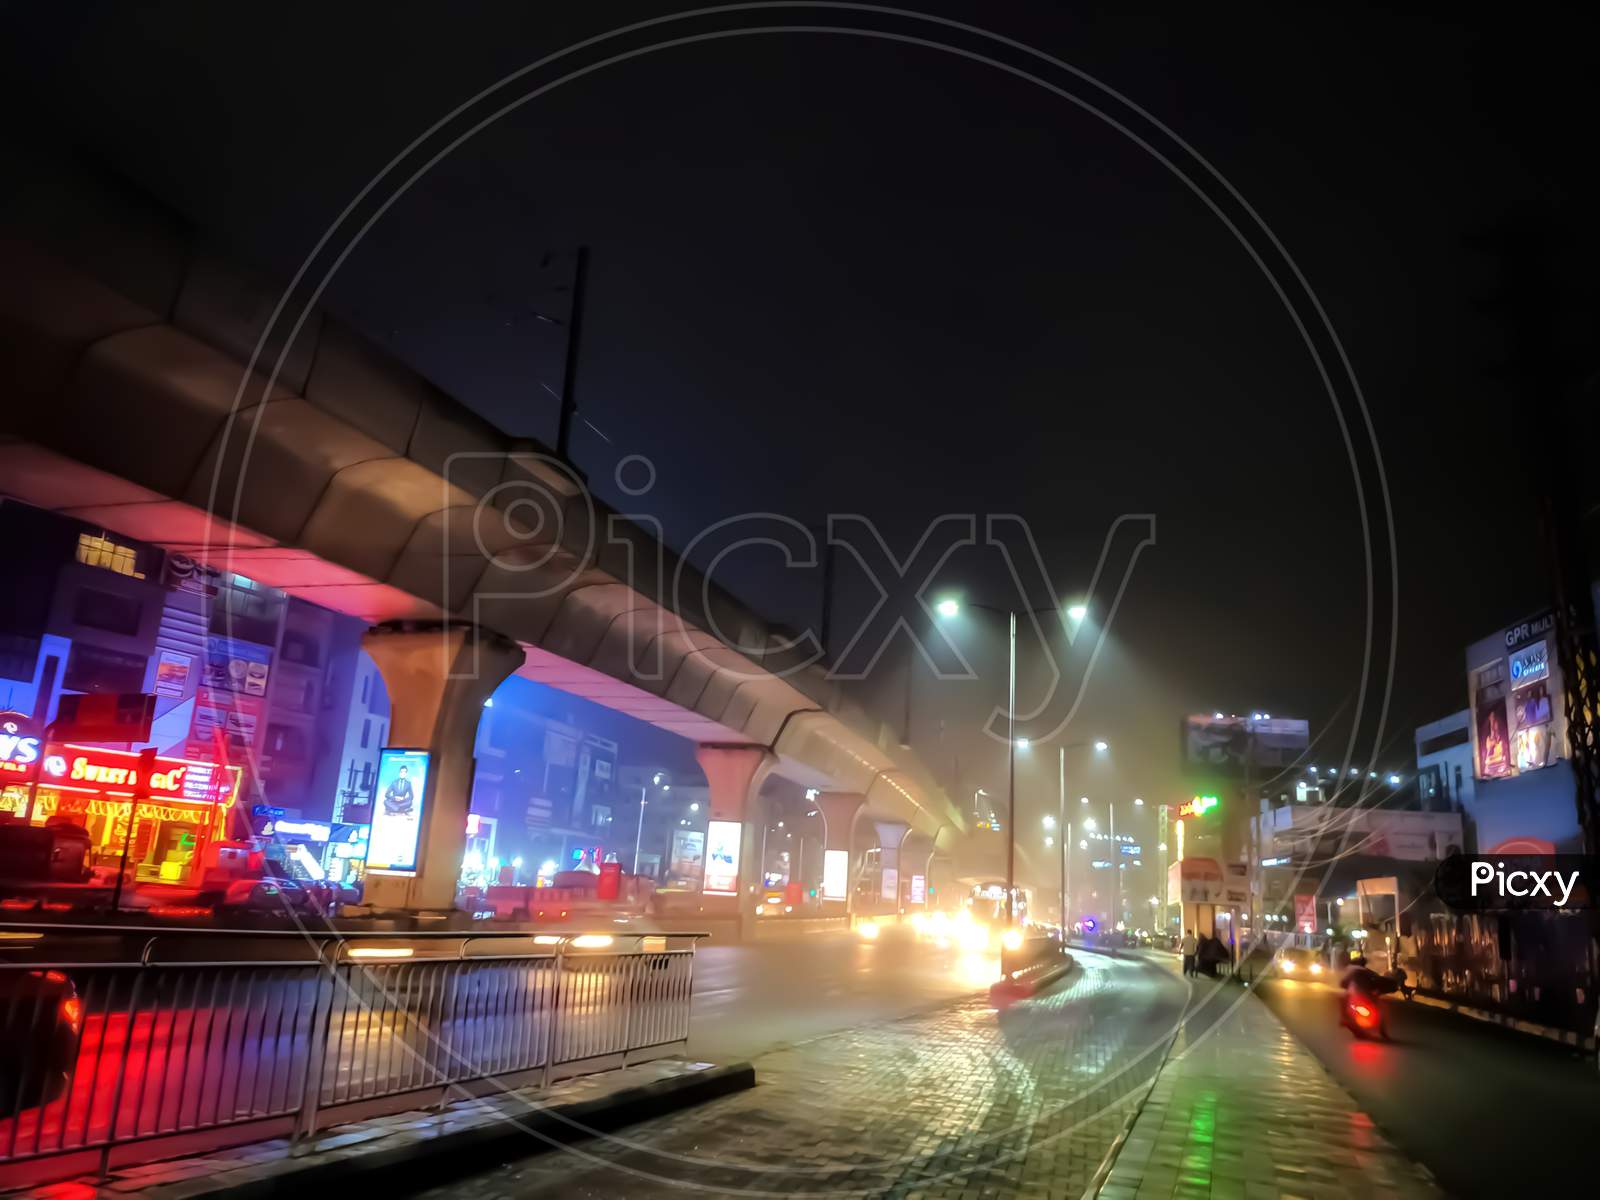 Night View Of Metro Station In The Hyderabad City